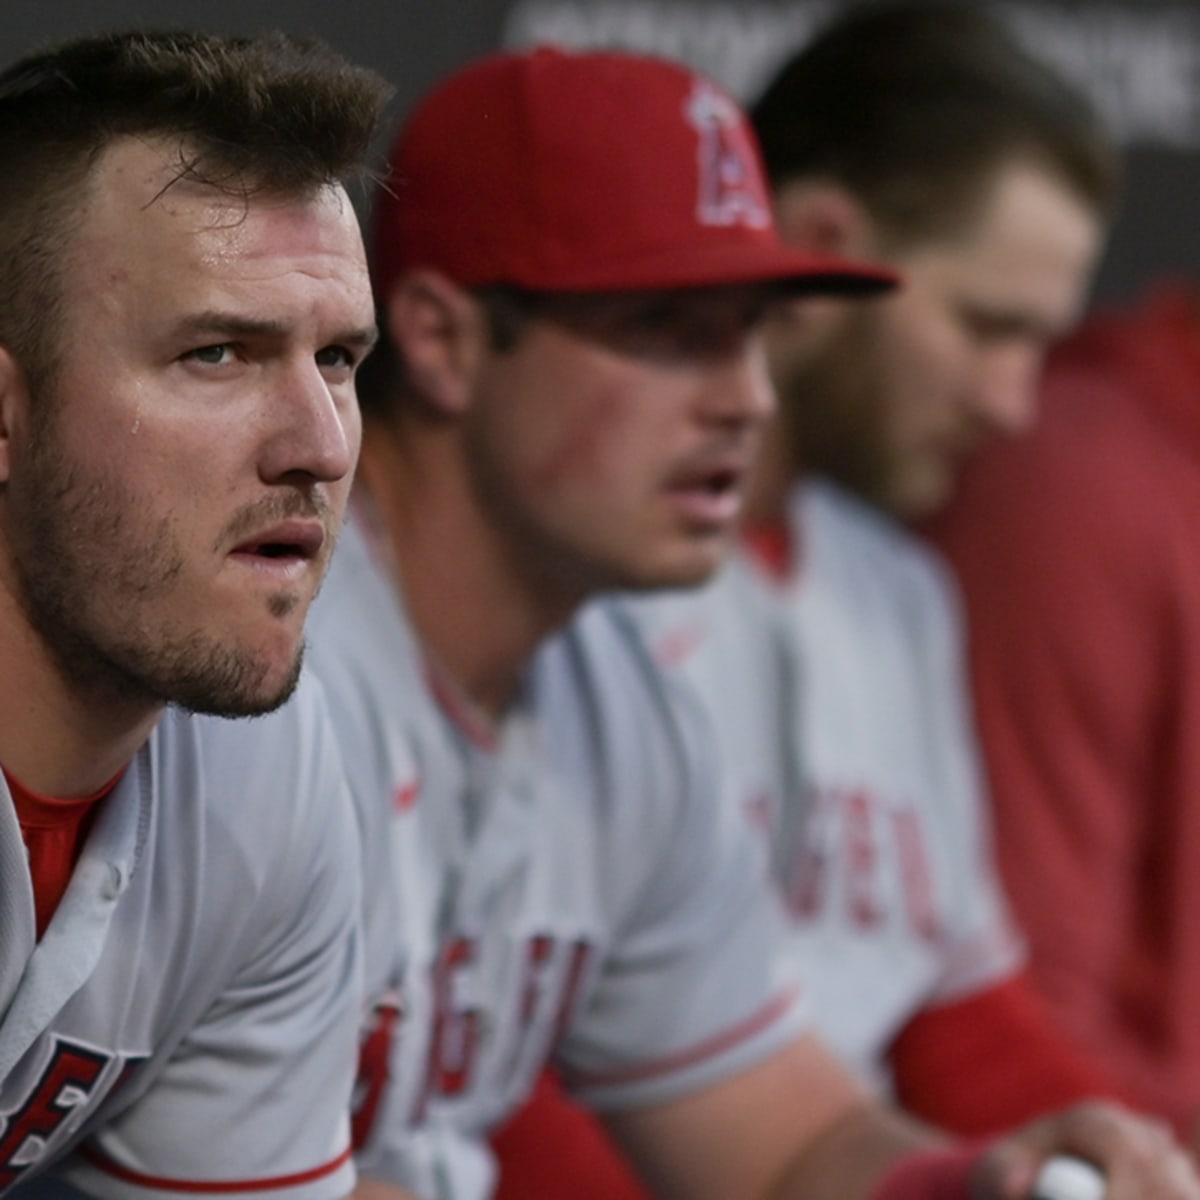 On this date five years ago, Mike Trout changed the face of the